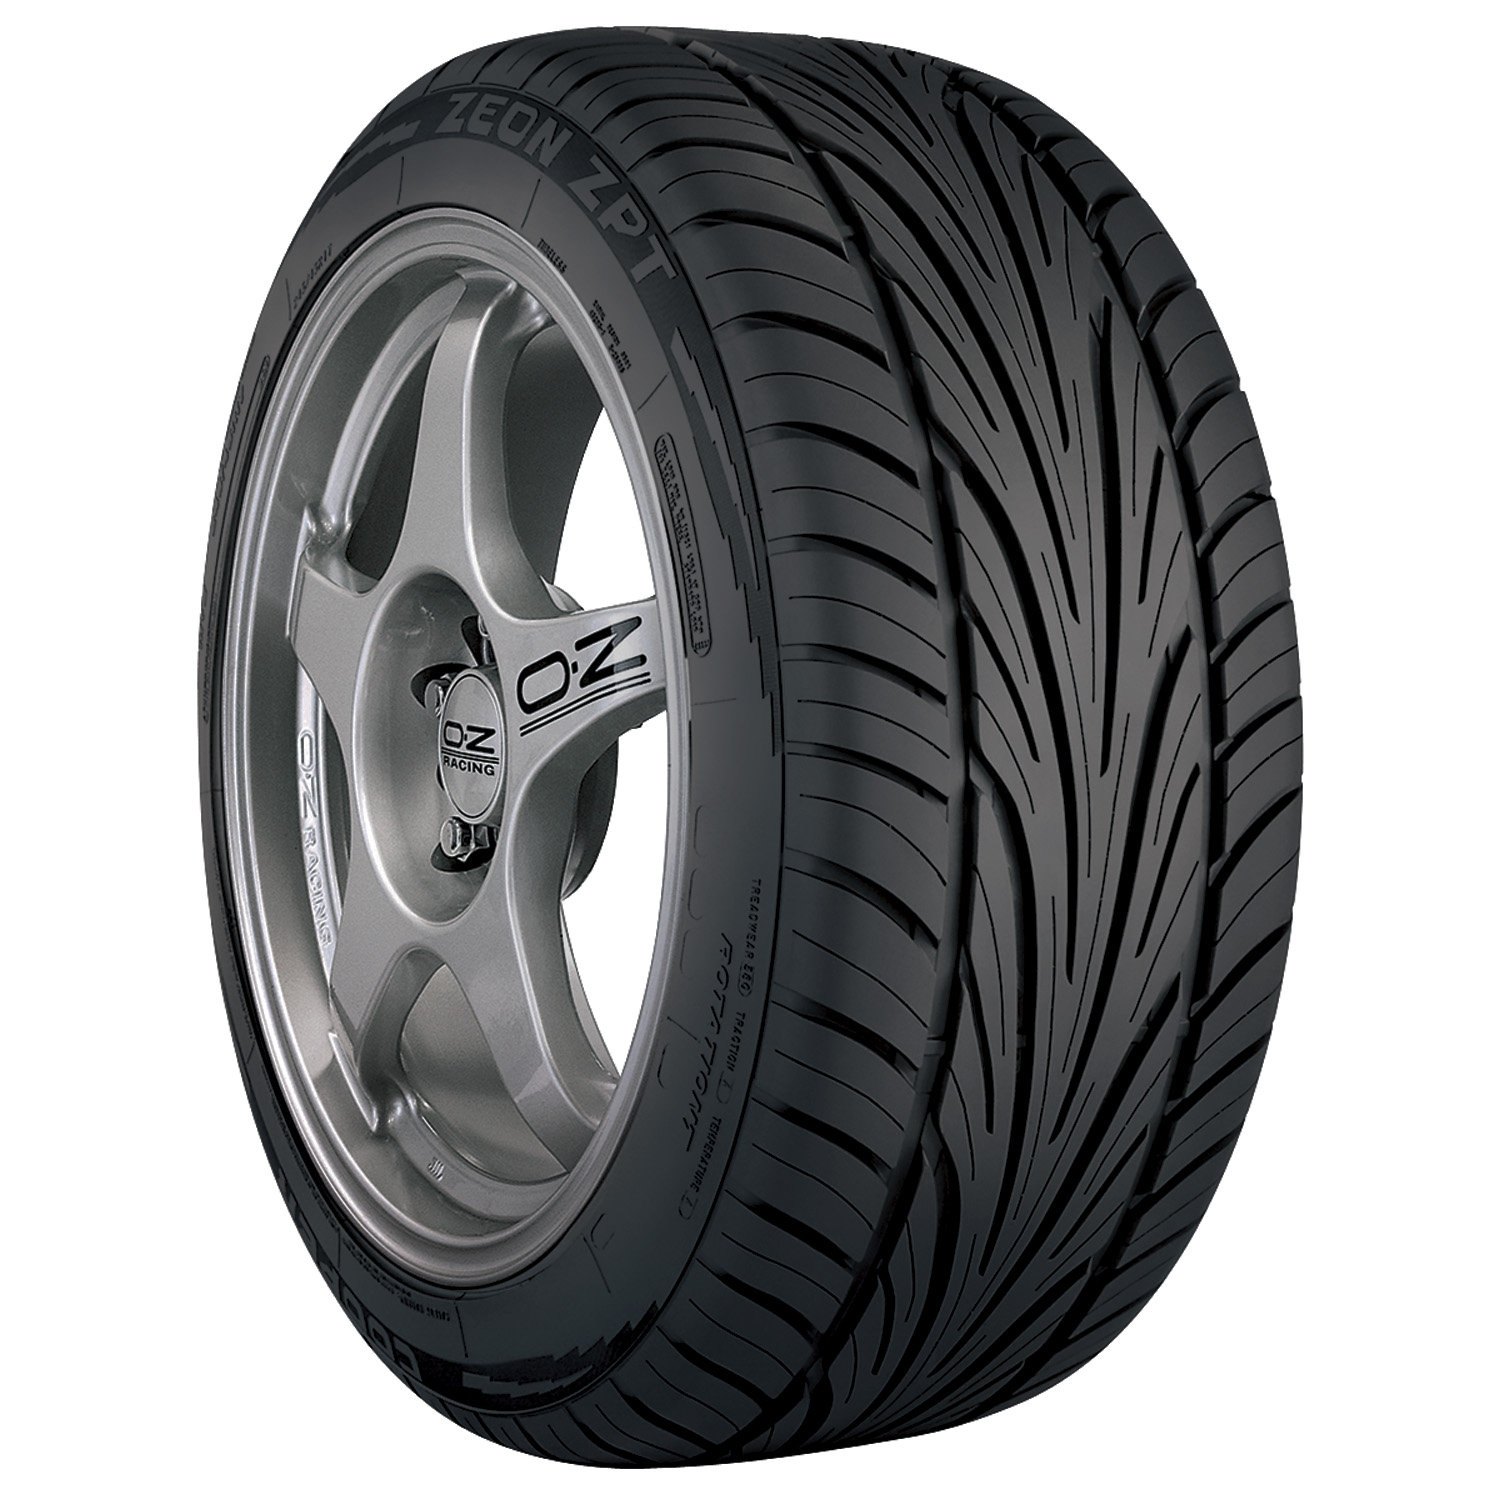 Cooper Zeon ZPT 225/45R17 91H BW All Season Tire Shop Your Way